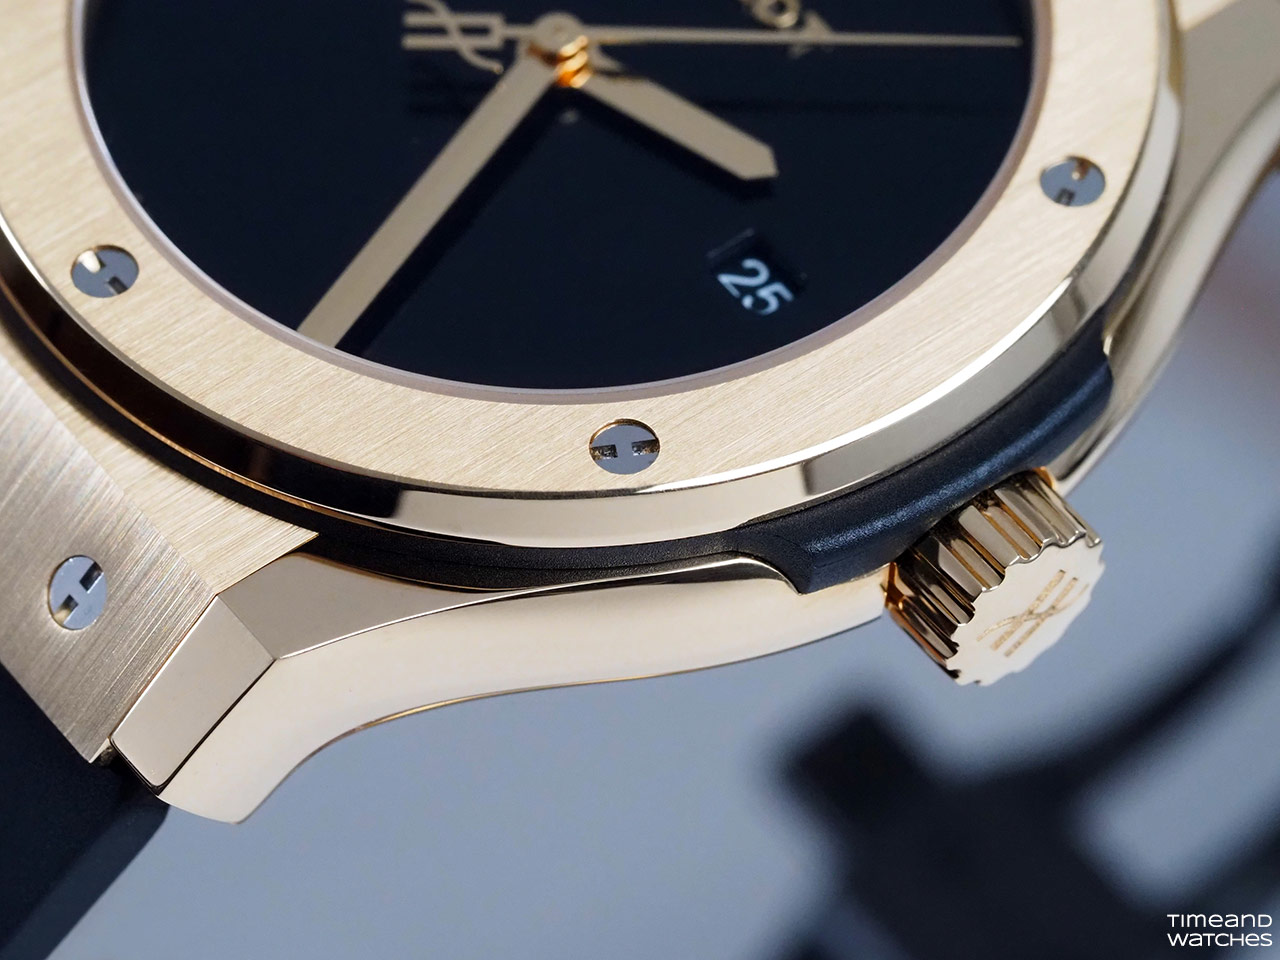 Review: Hublot Classic Fusion Original 42 mm in Yellow Gold